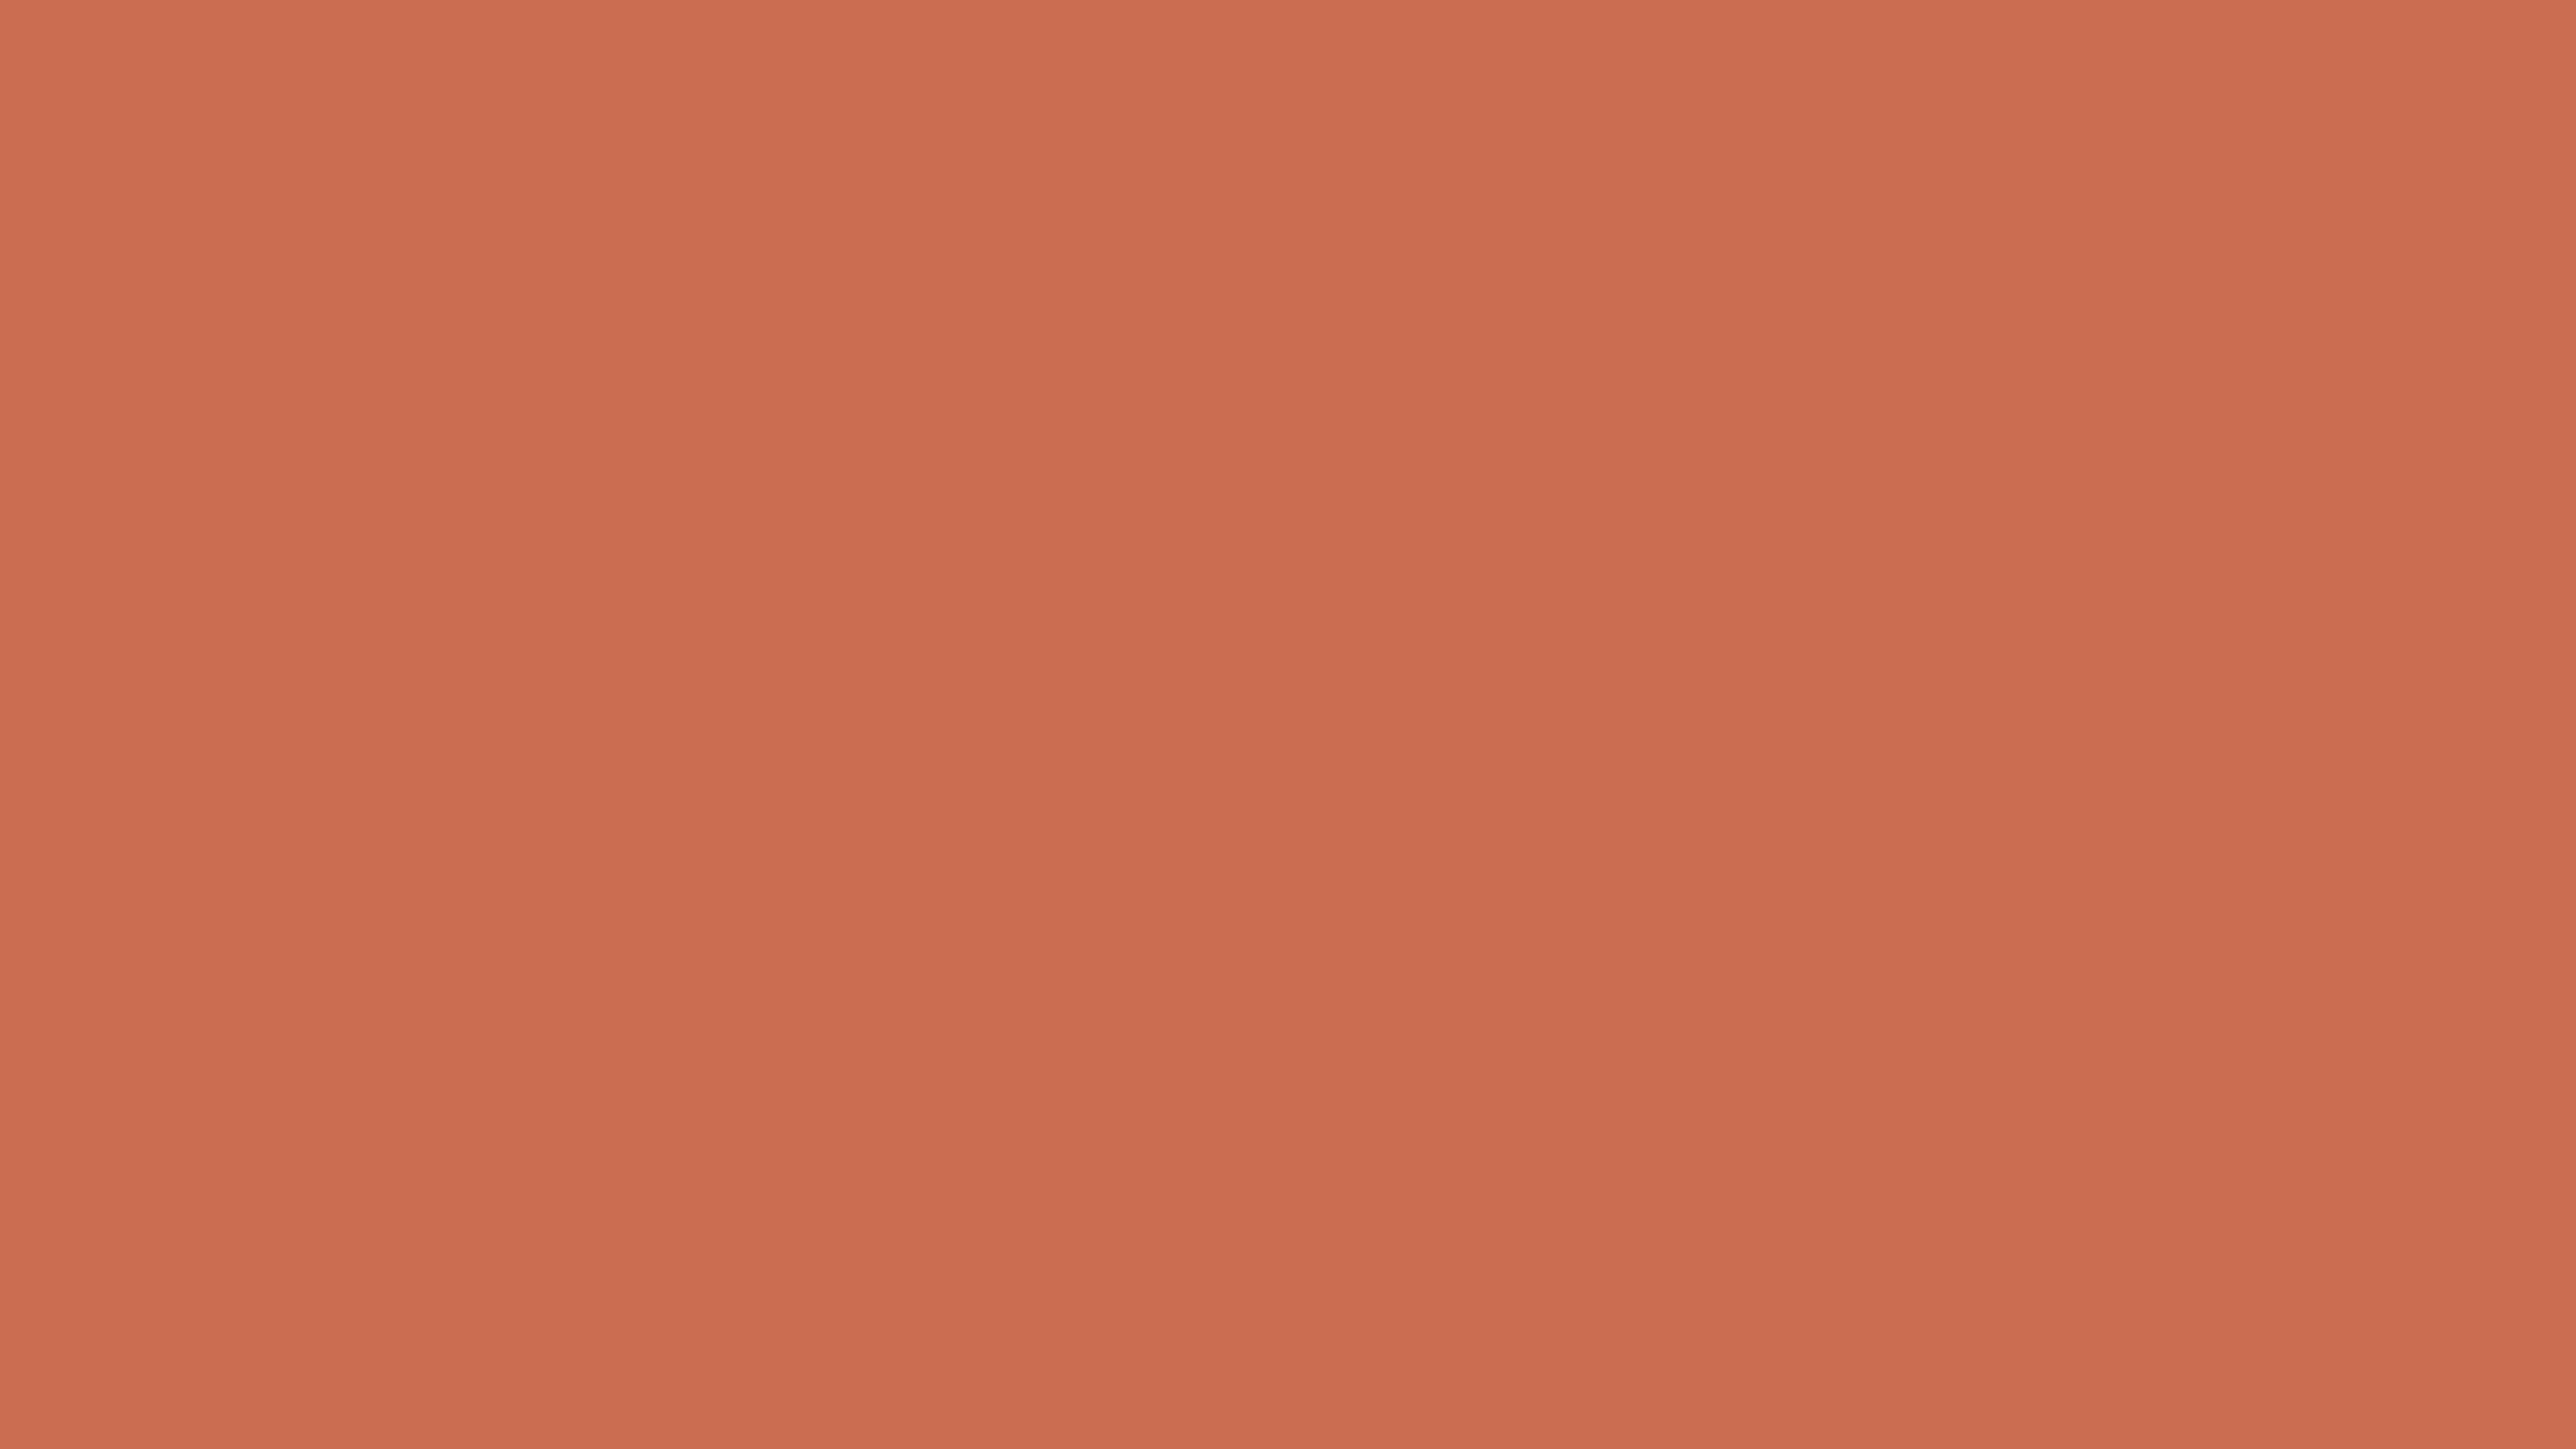 4096x2304 Copper Red Solid Color Background